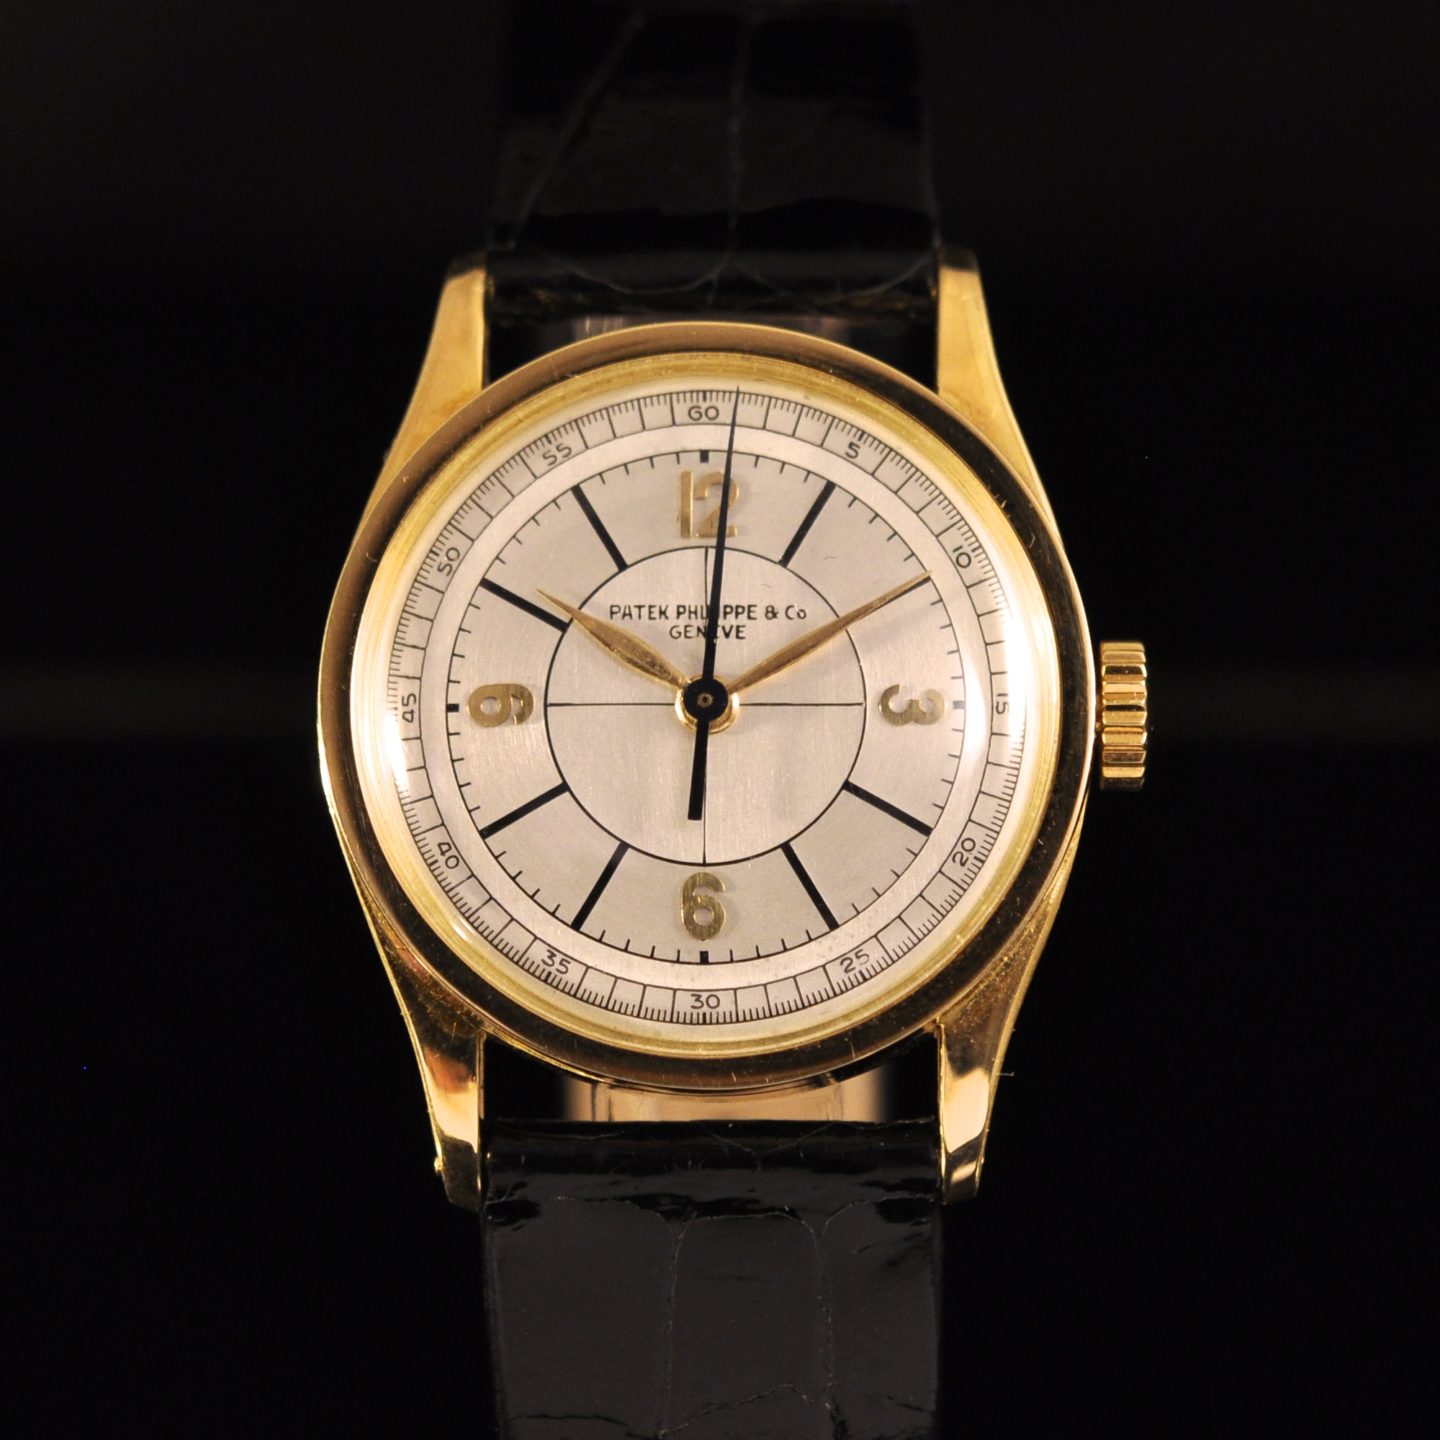 History of the Patek Philippe Calatrava Part 1 - The Reference 96